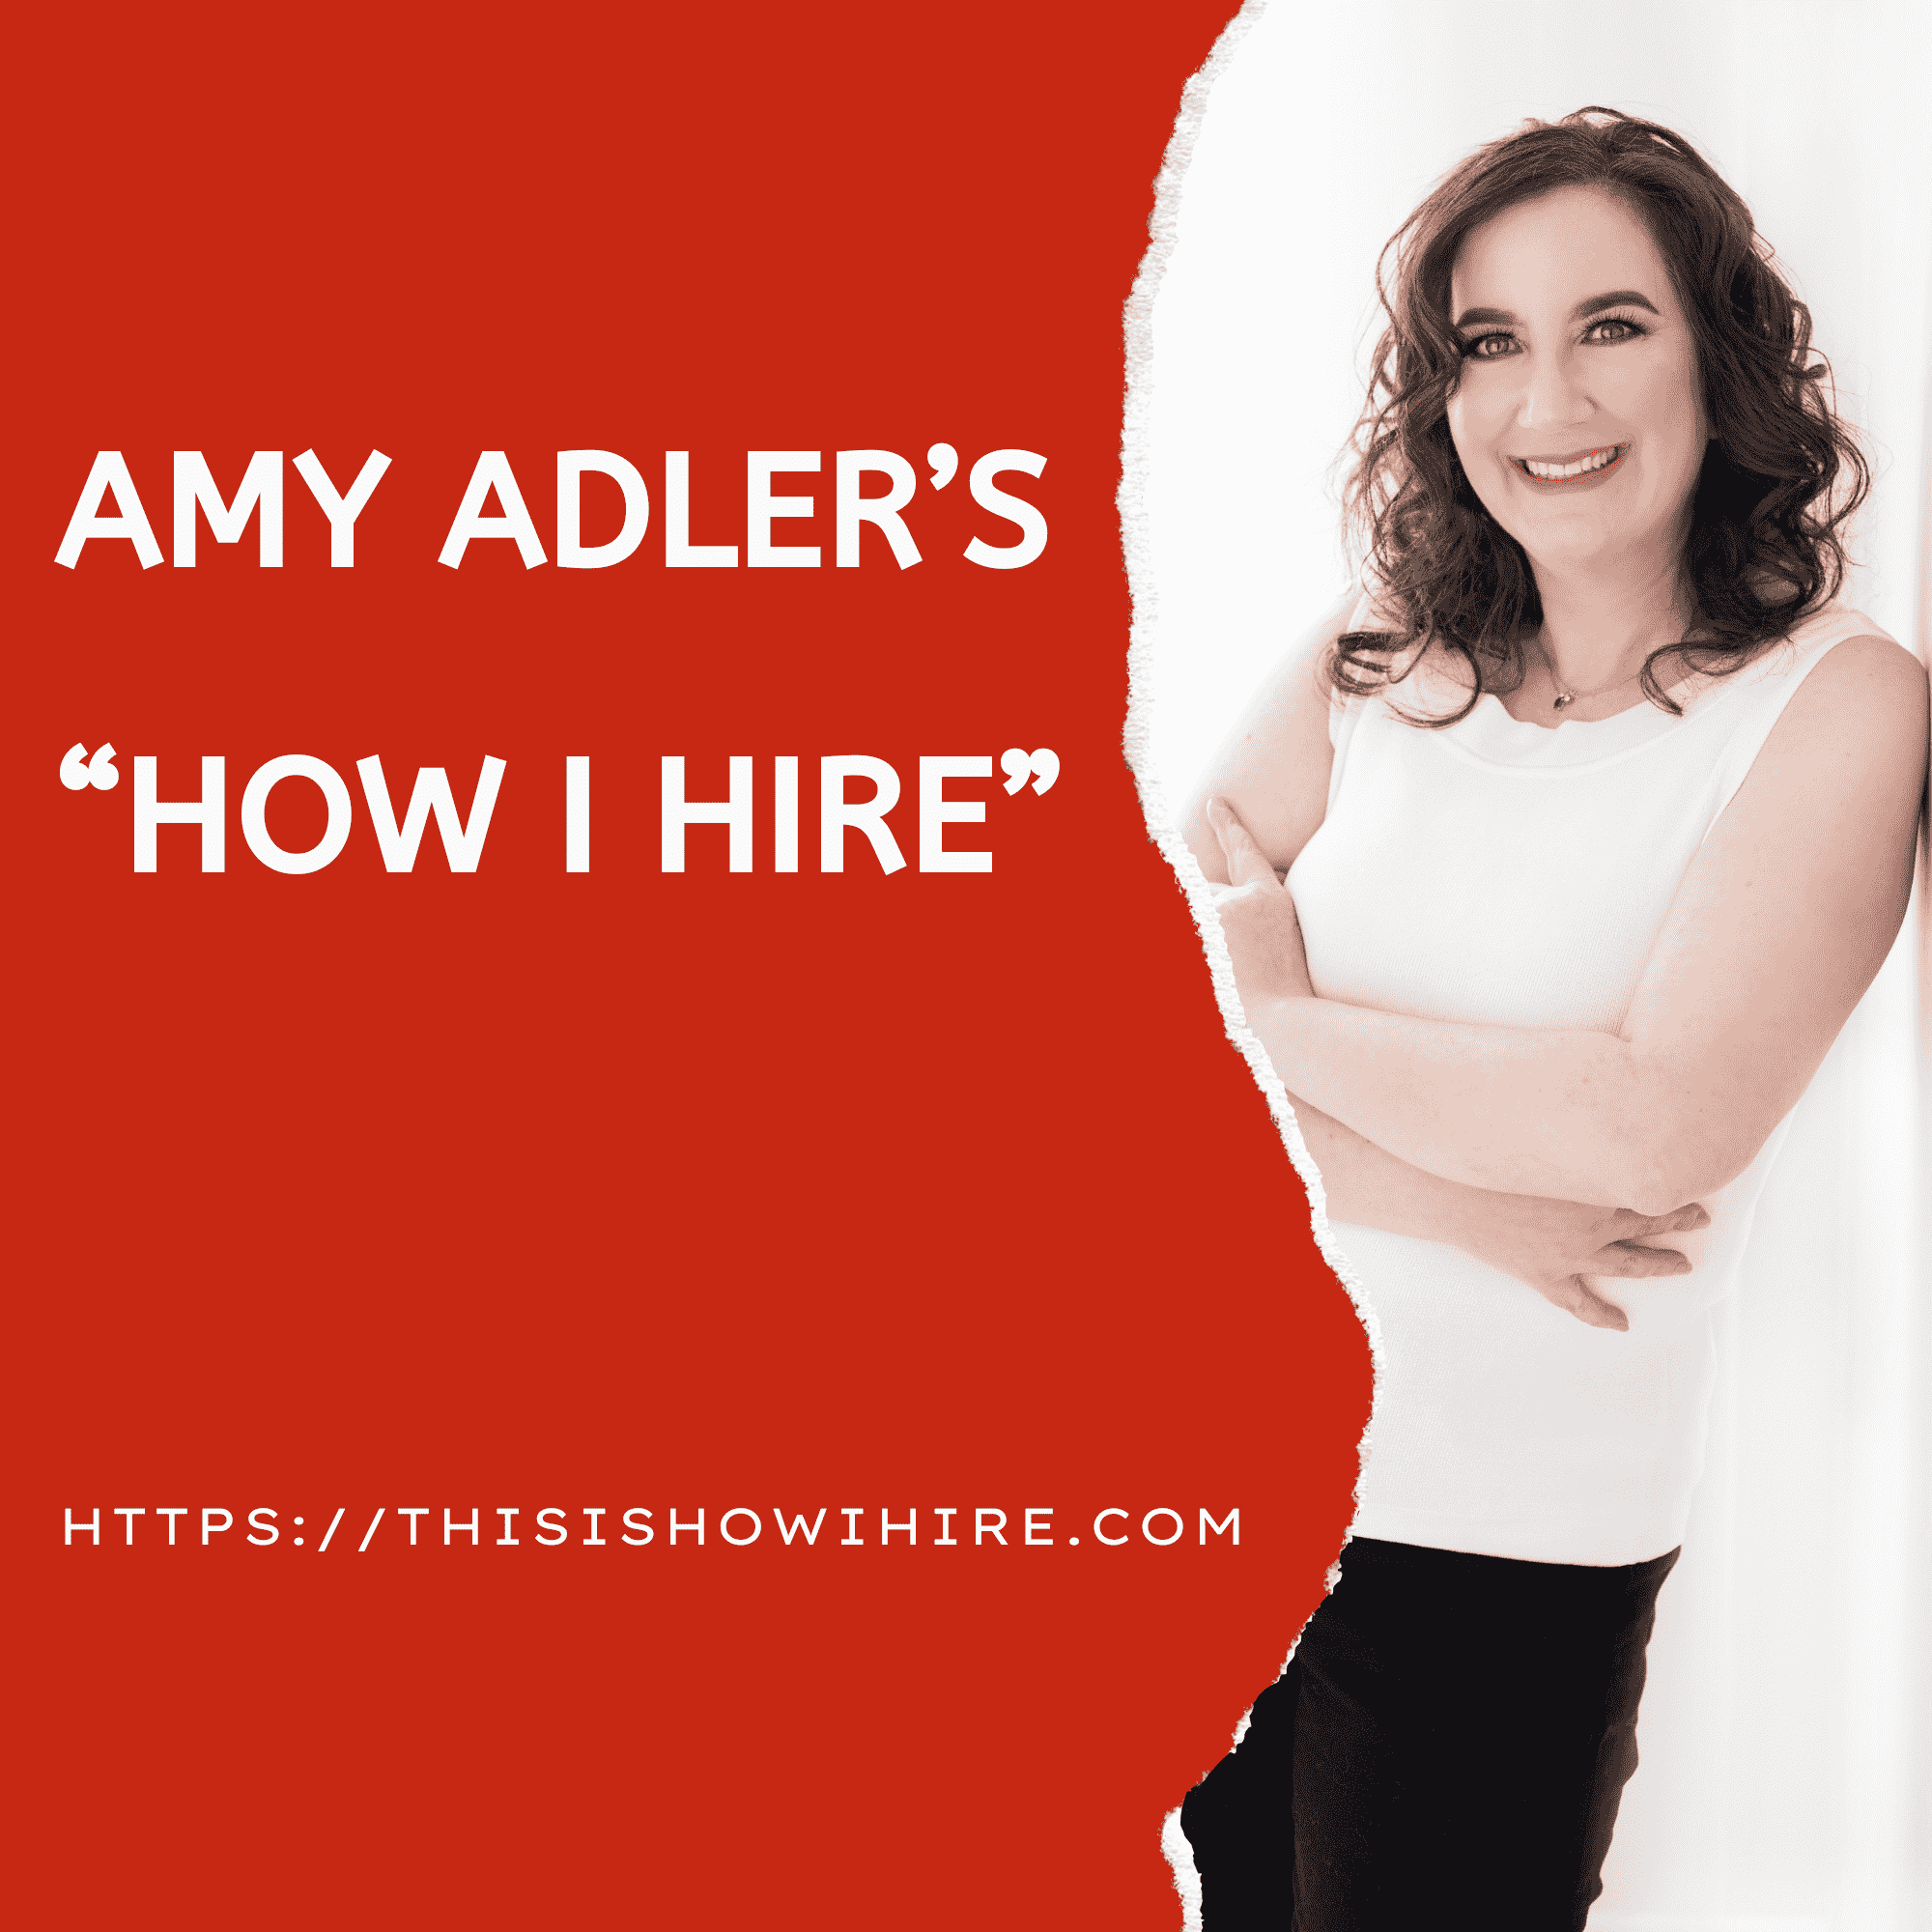 Amy Adler's "How I Hire"